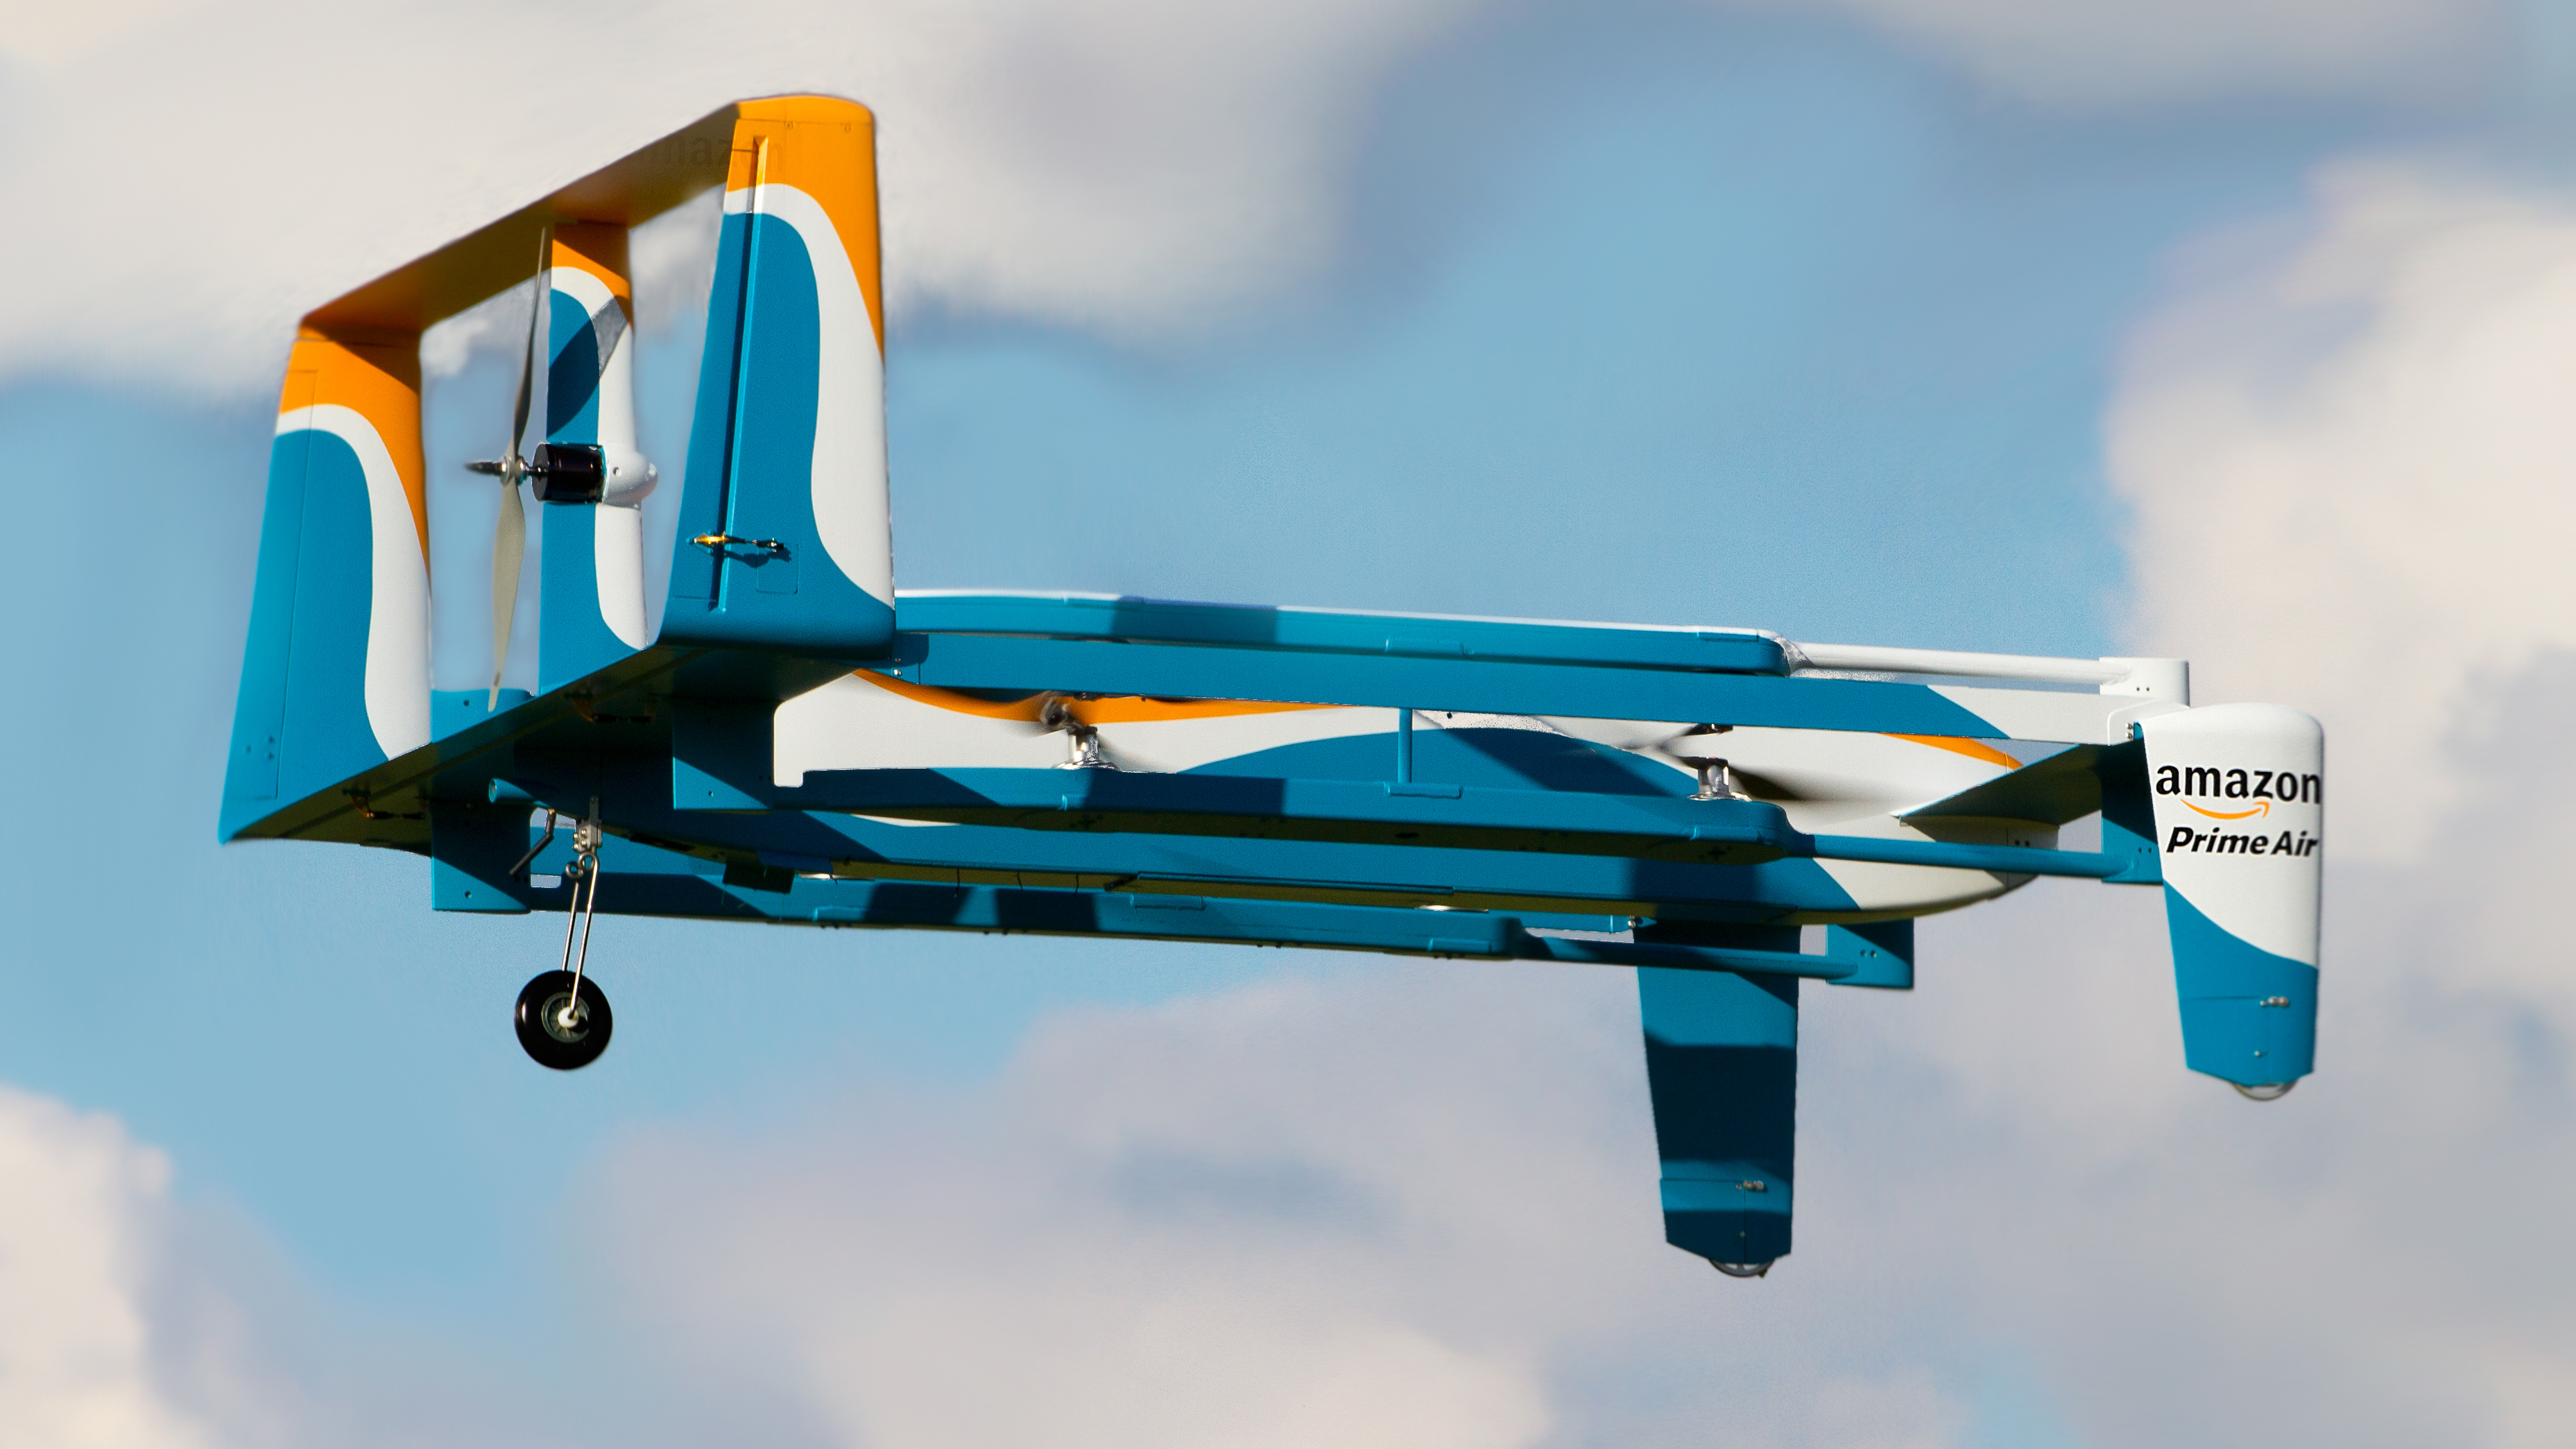 An Amazon Prime Air delivery drone in flight